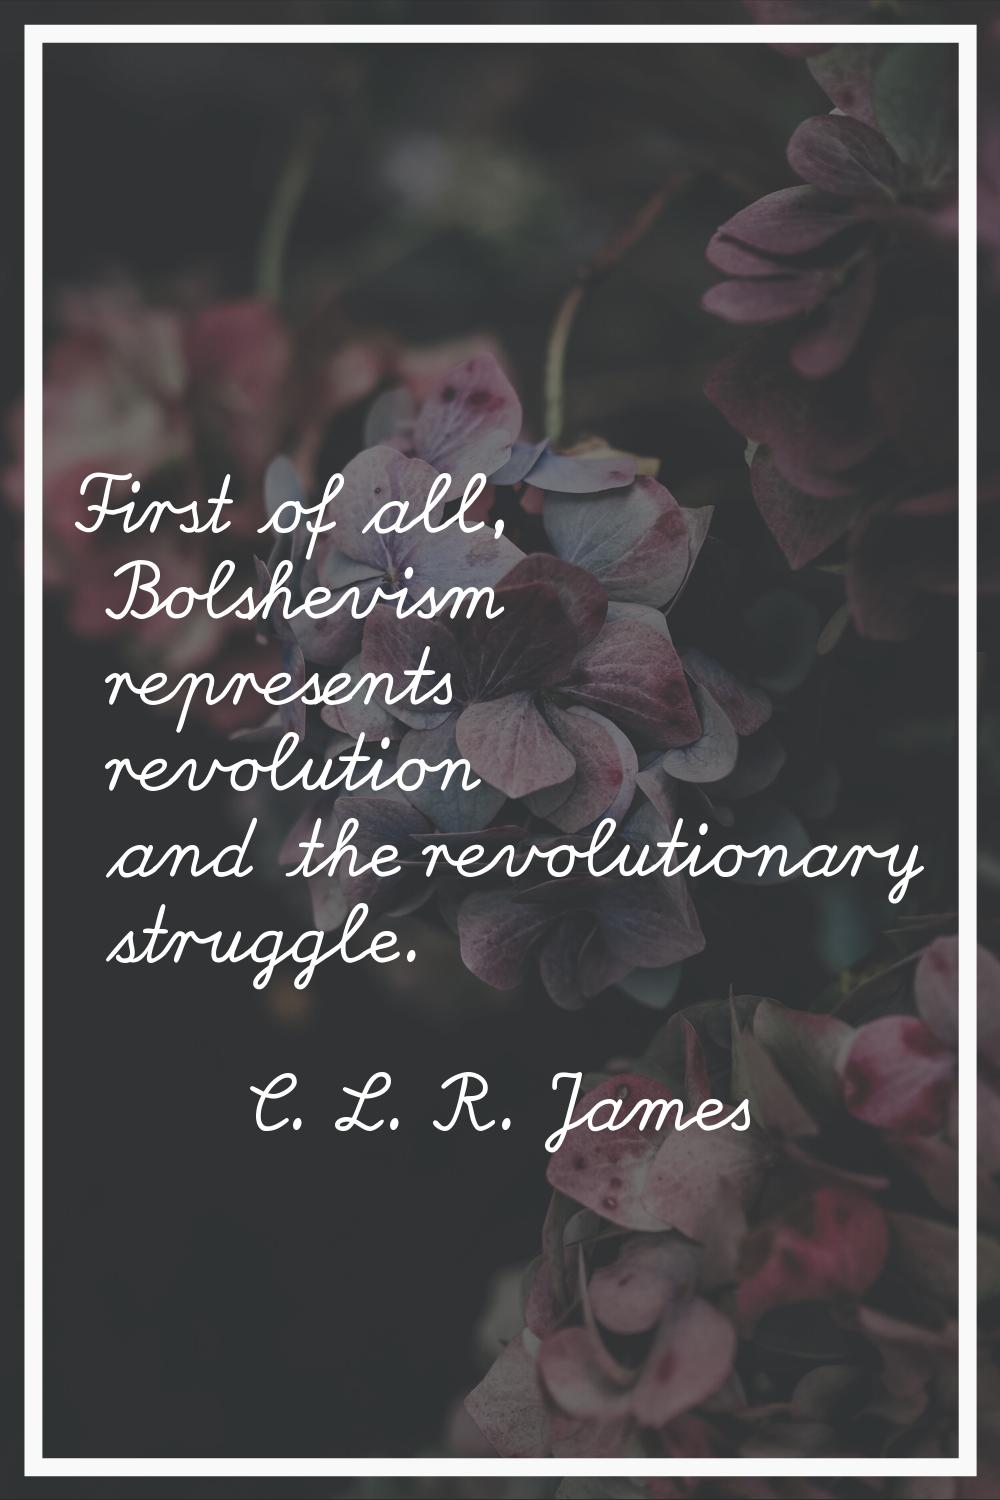 First of all, Bolshevism represents revolution and the revolutionary struggle.